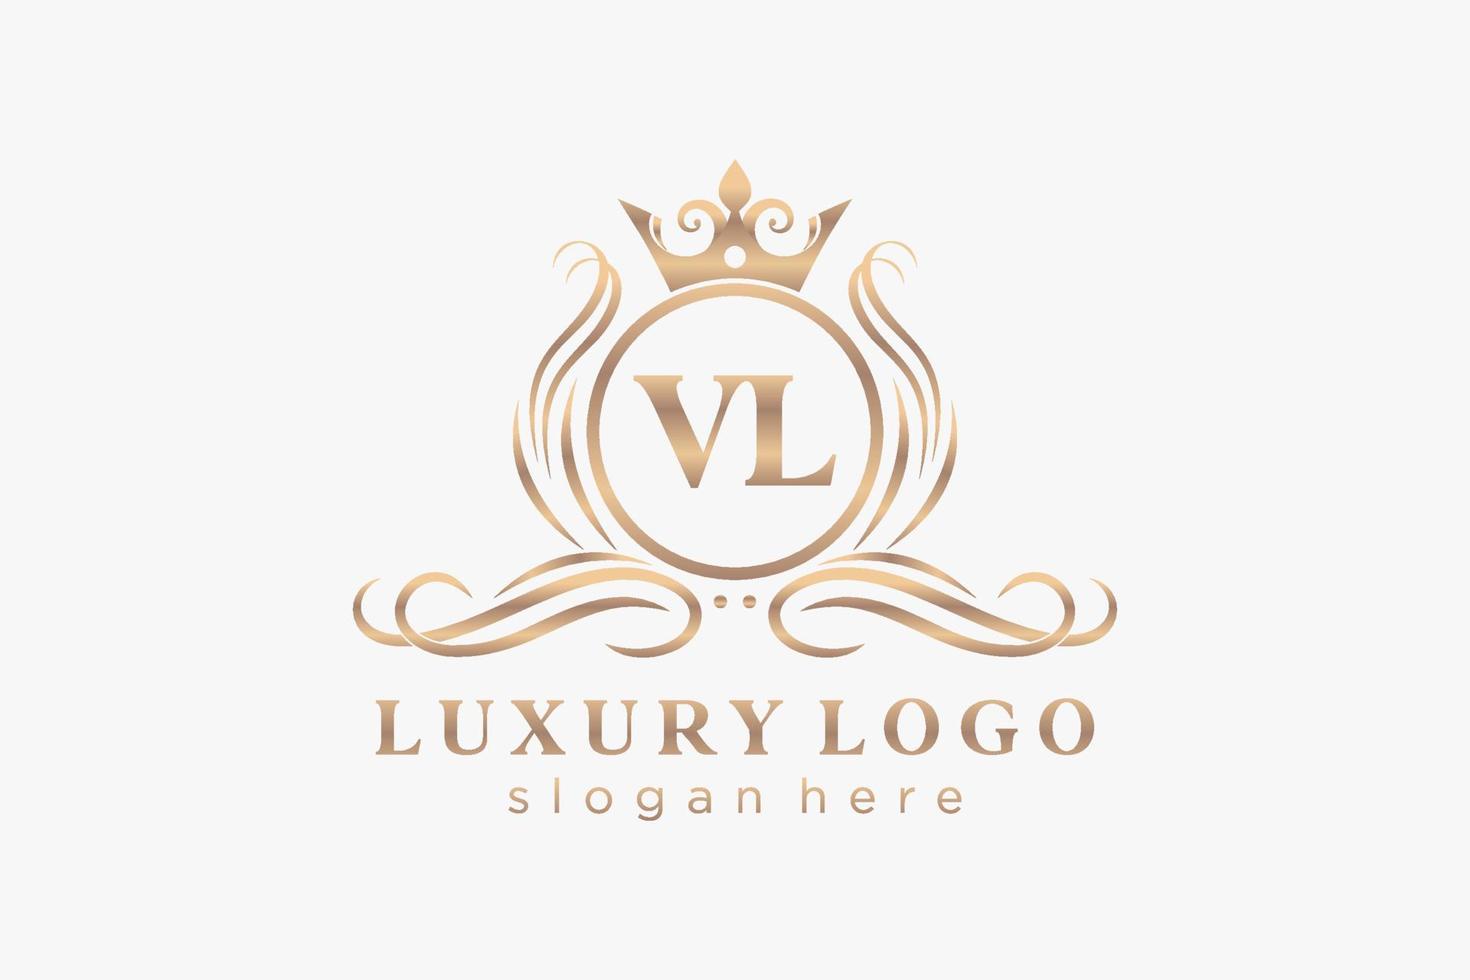 Initial VL Letter Royal Luxury Logo template in vector art for Restaurant, Royalty, Boutique, Cafe, Hotel, Heraldic, Jewelry, Fashion and other vector illustration.